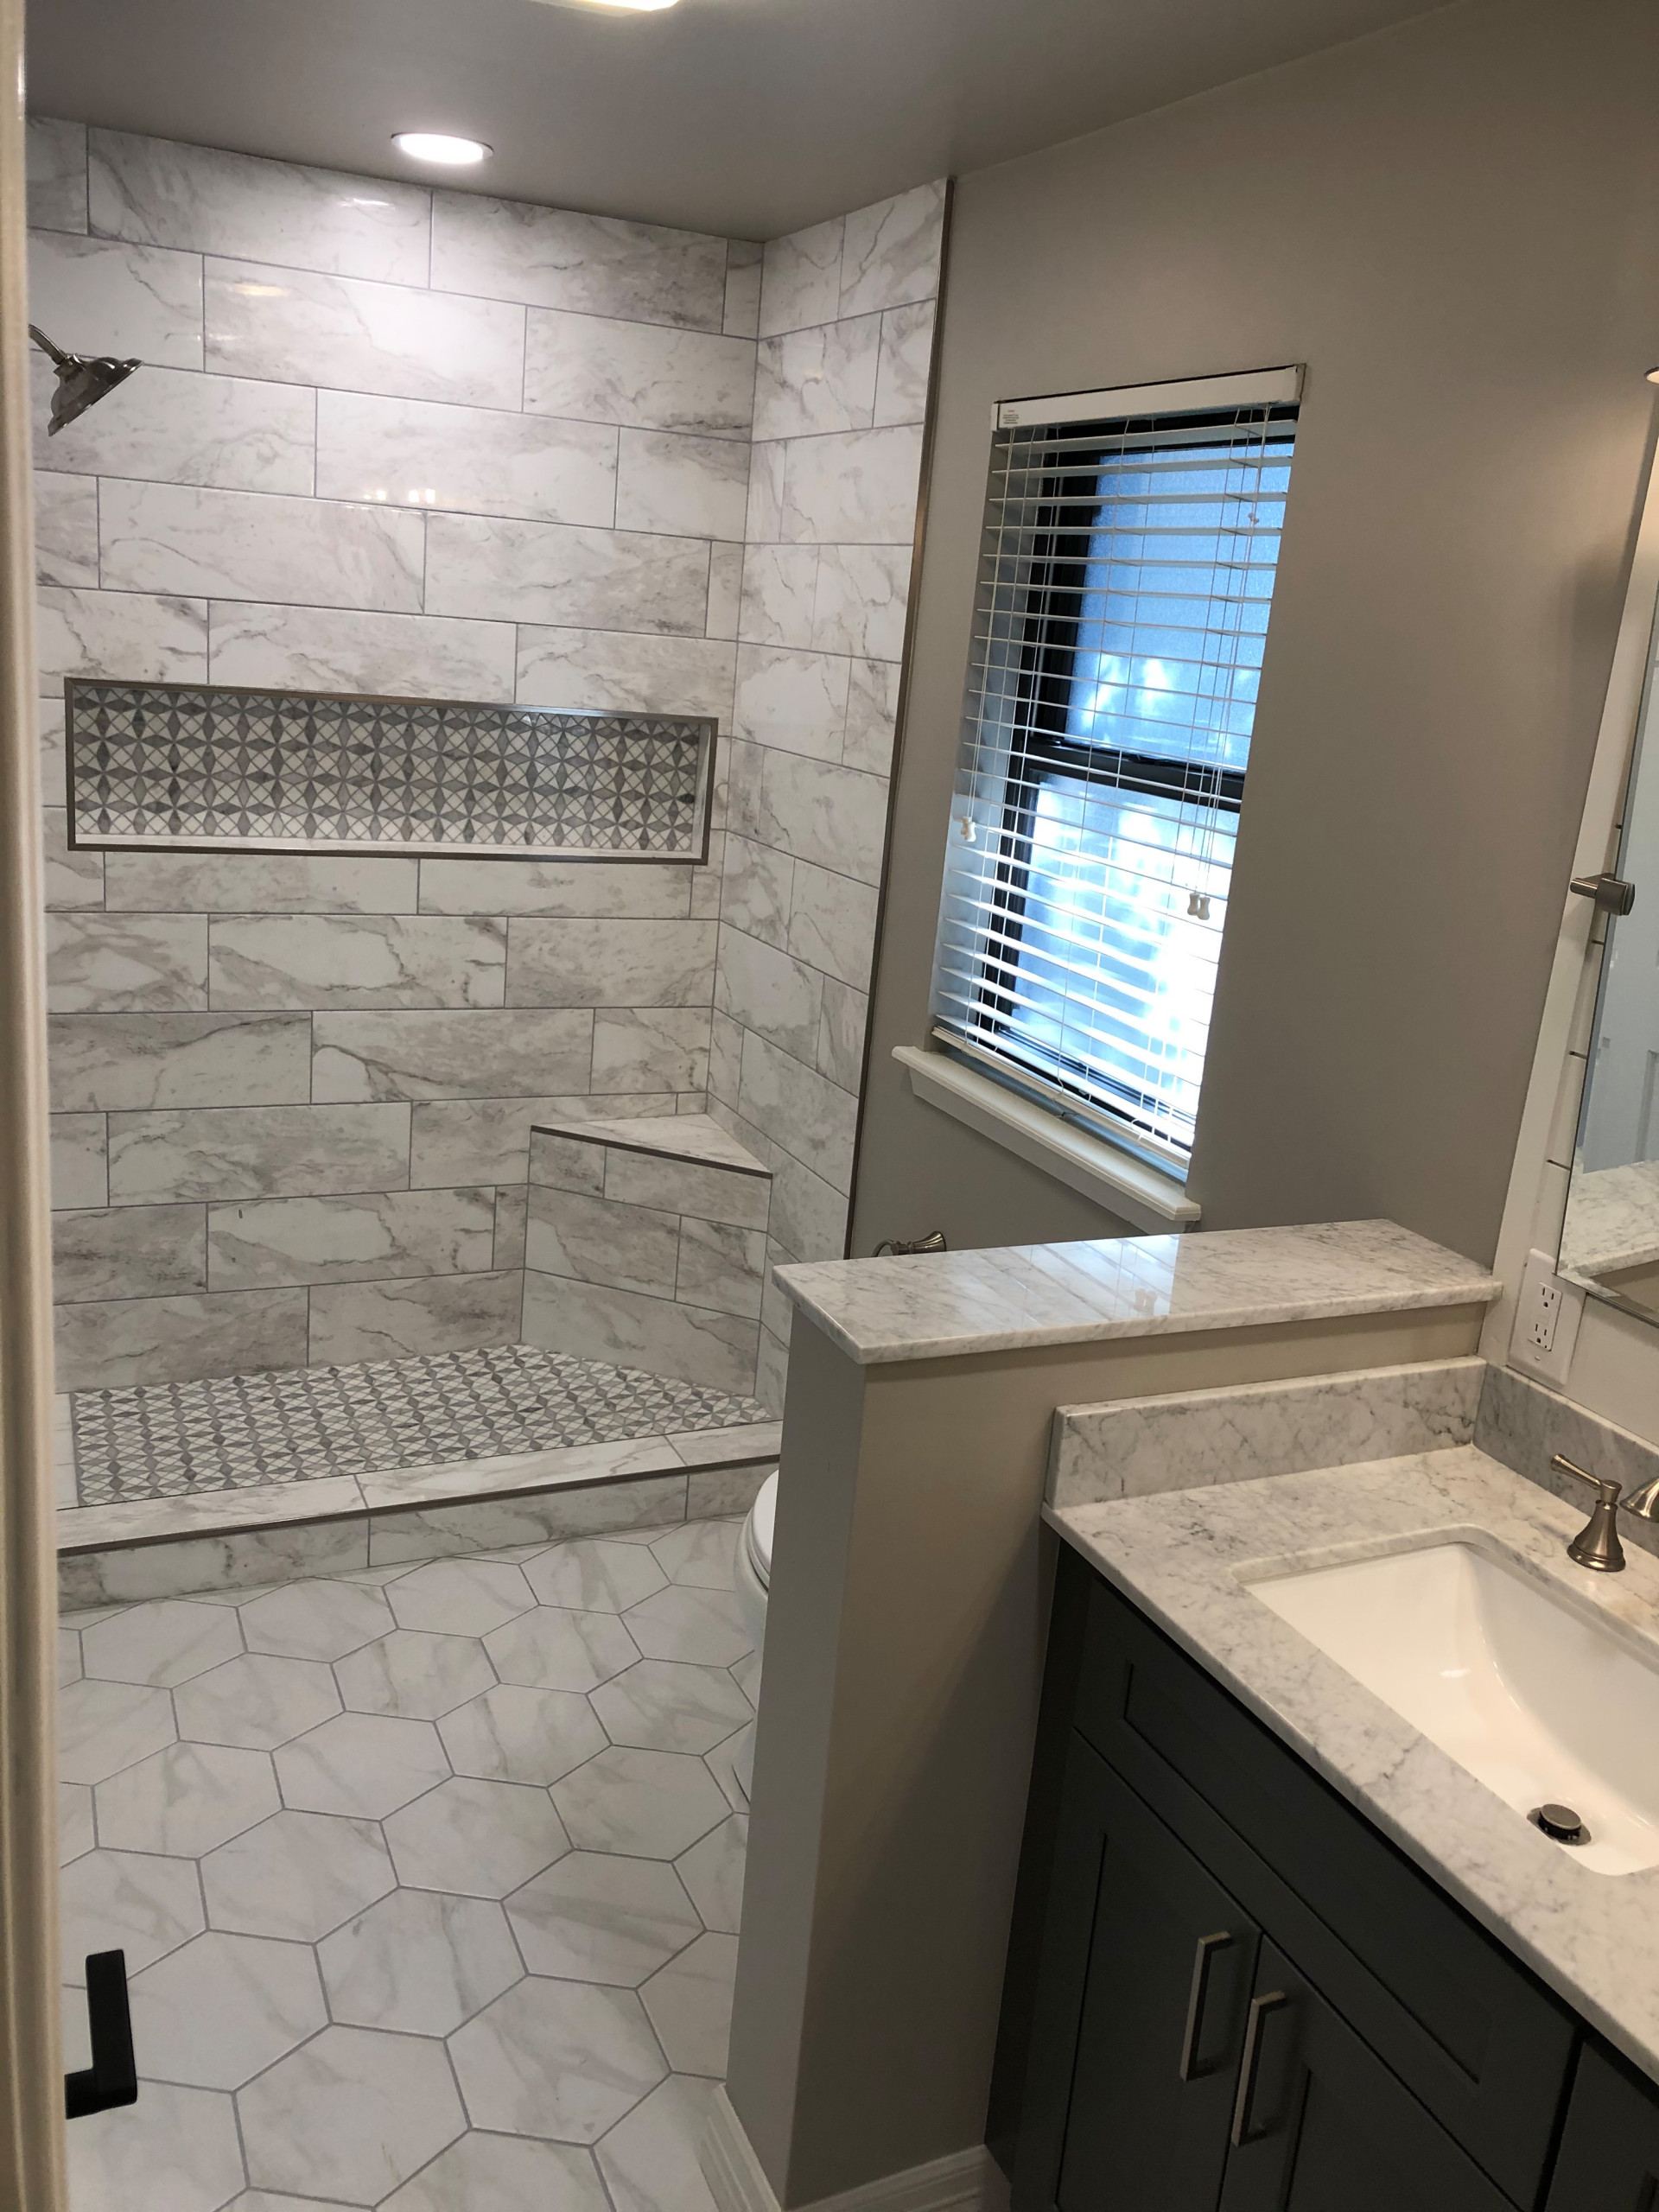 Kitchen and Bathroom Remodel to Last